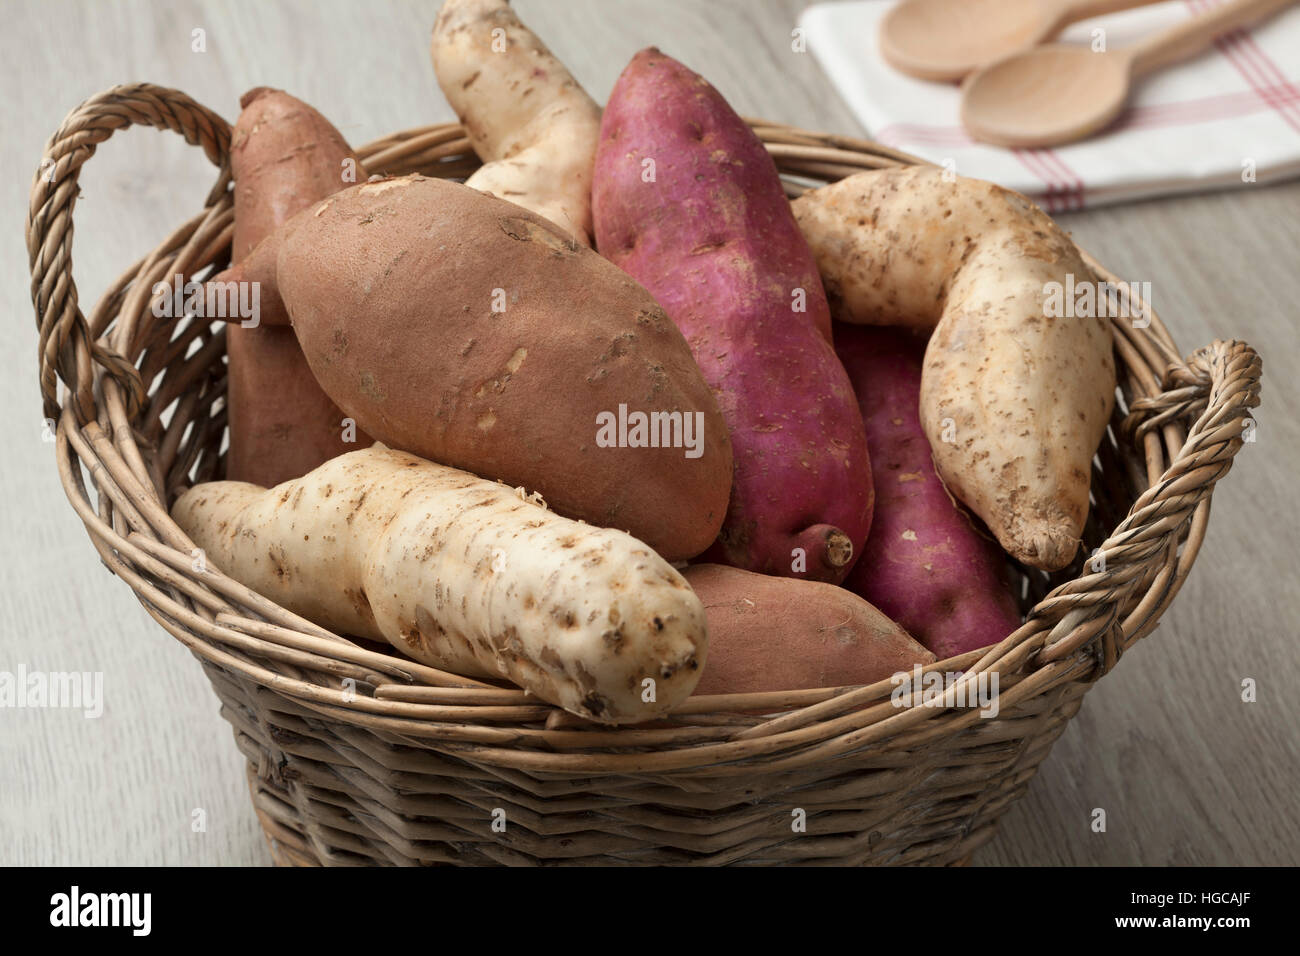 Basket with red, purple and white sweet potatoes Stock Photo